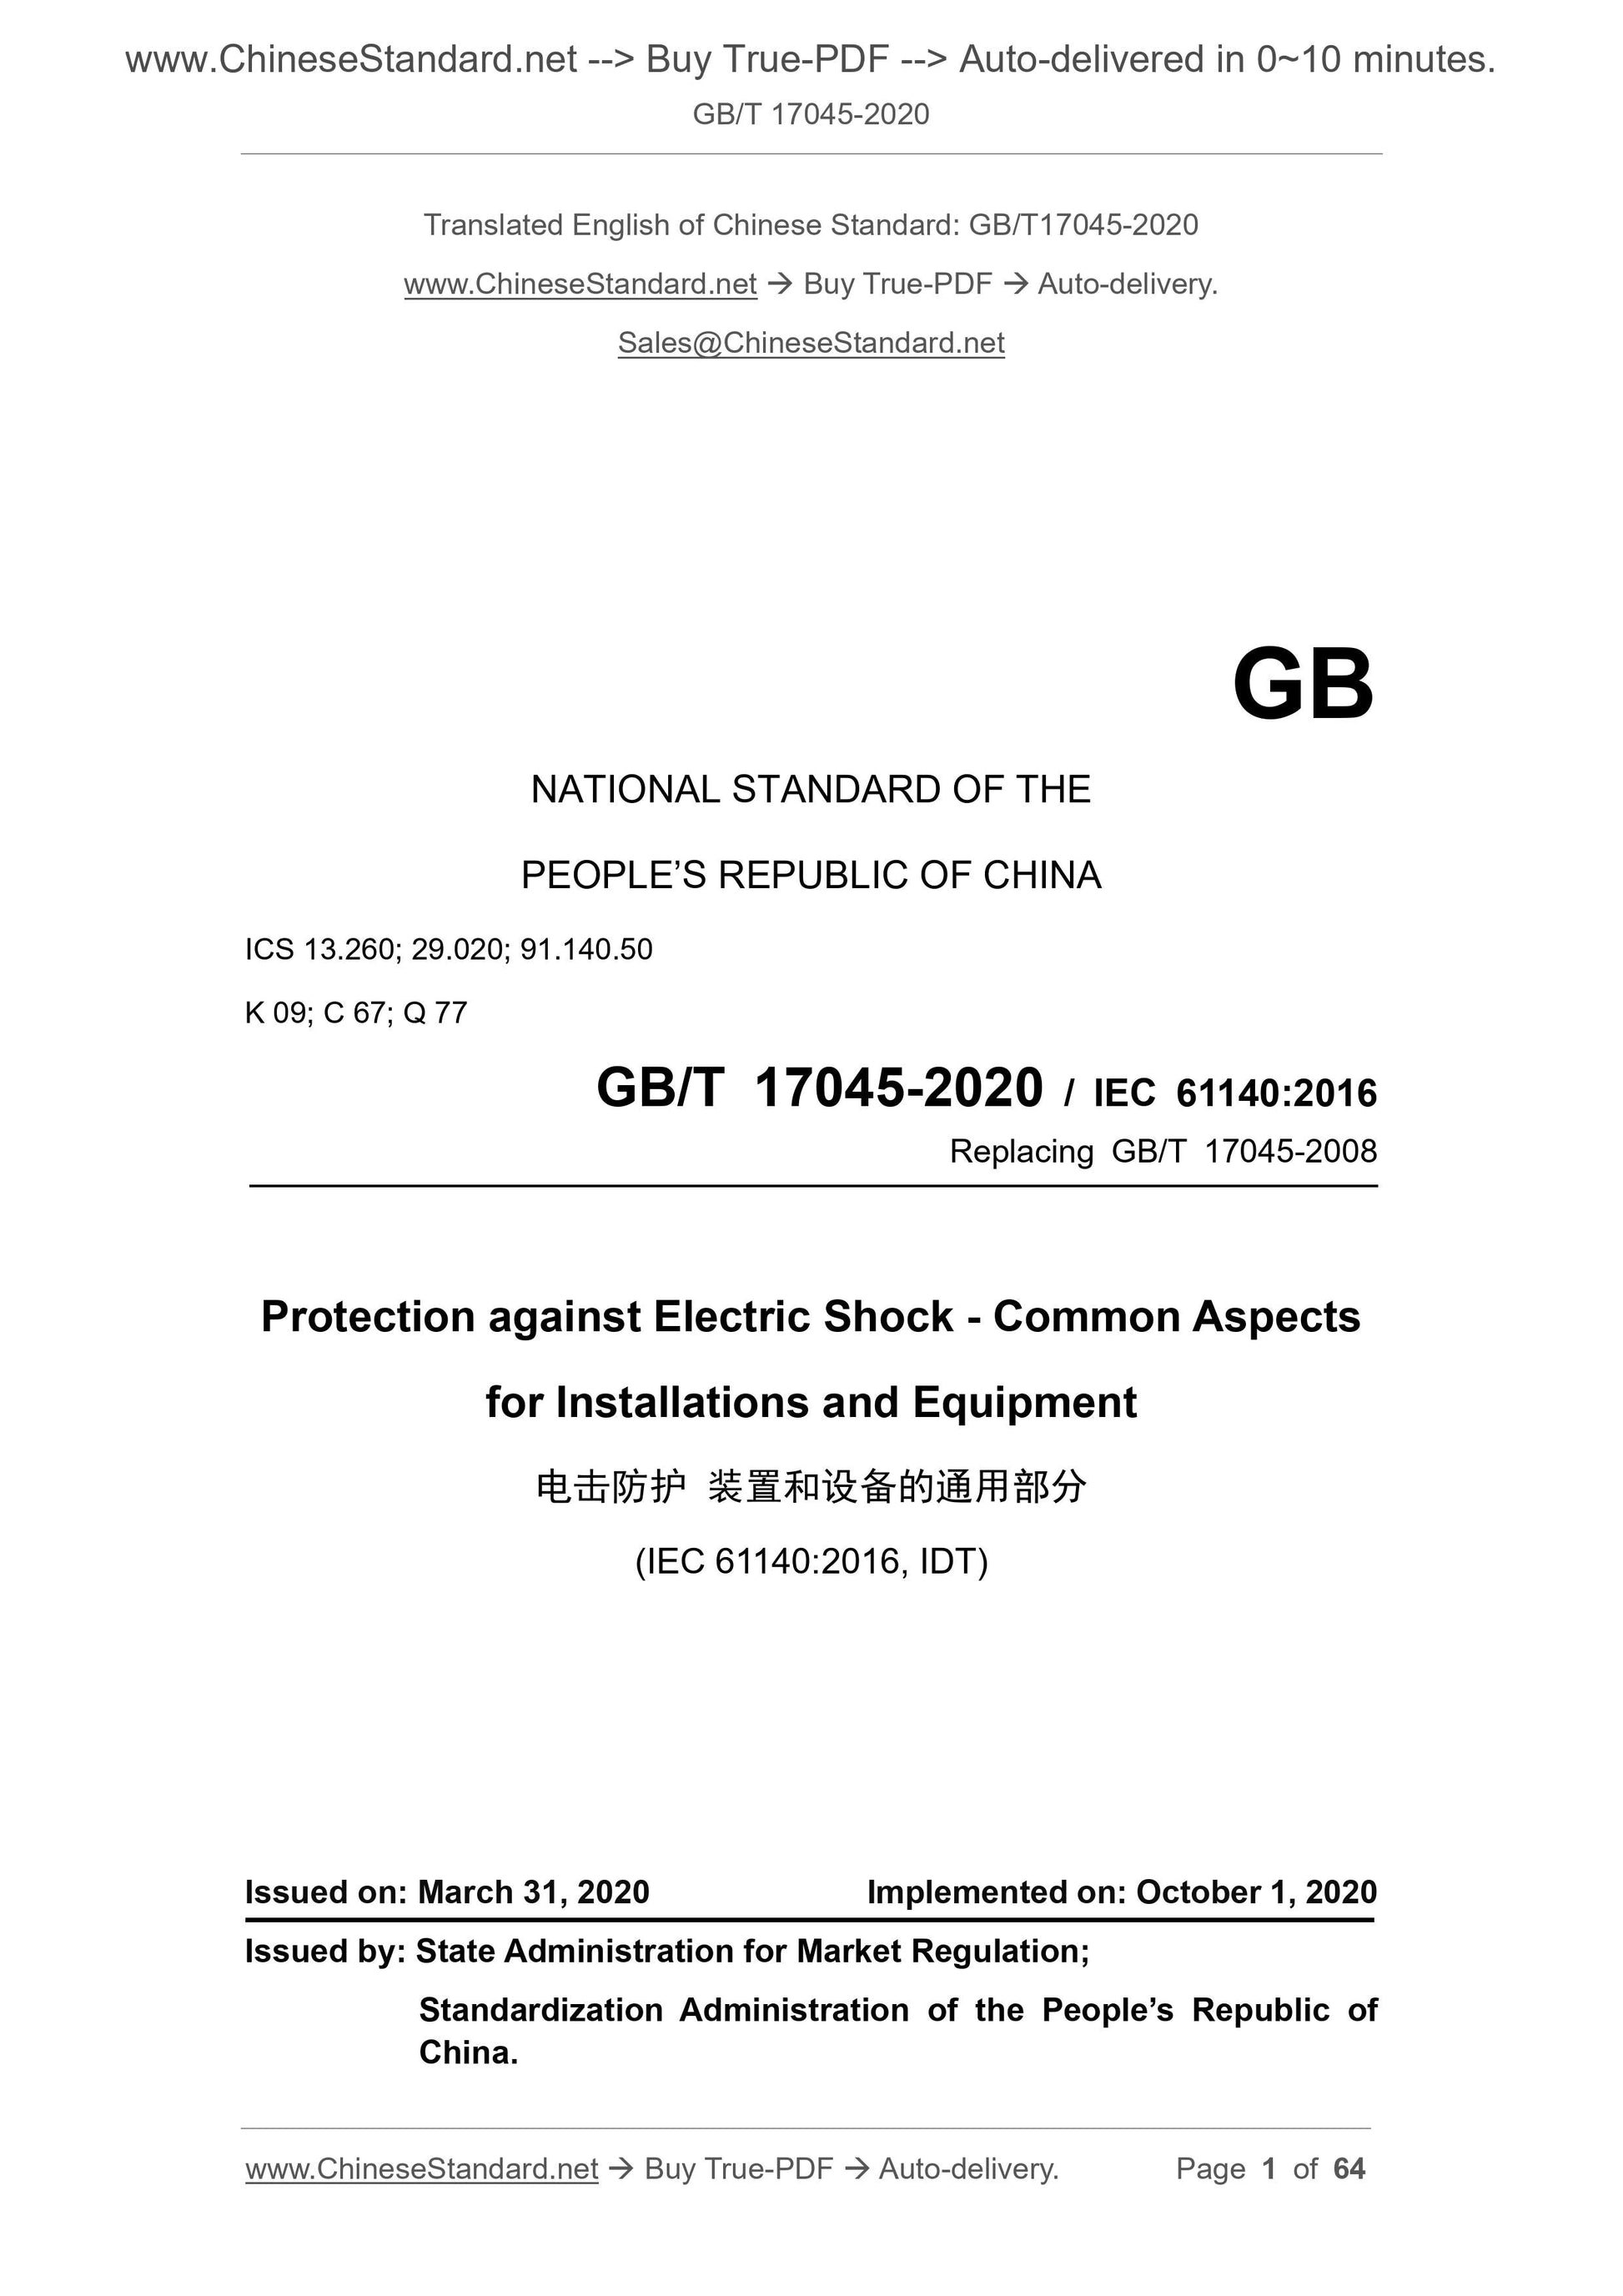 GB/T 17045-2020 Page 1